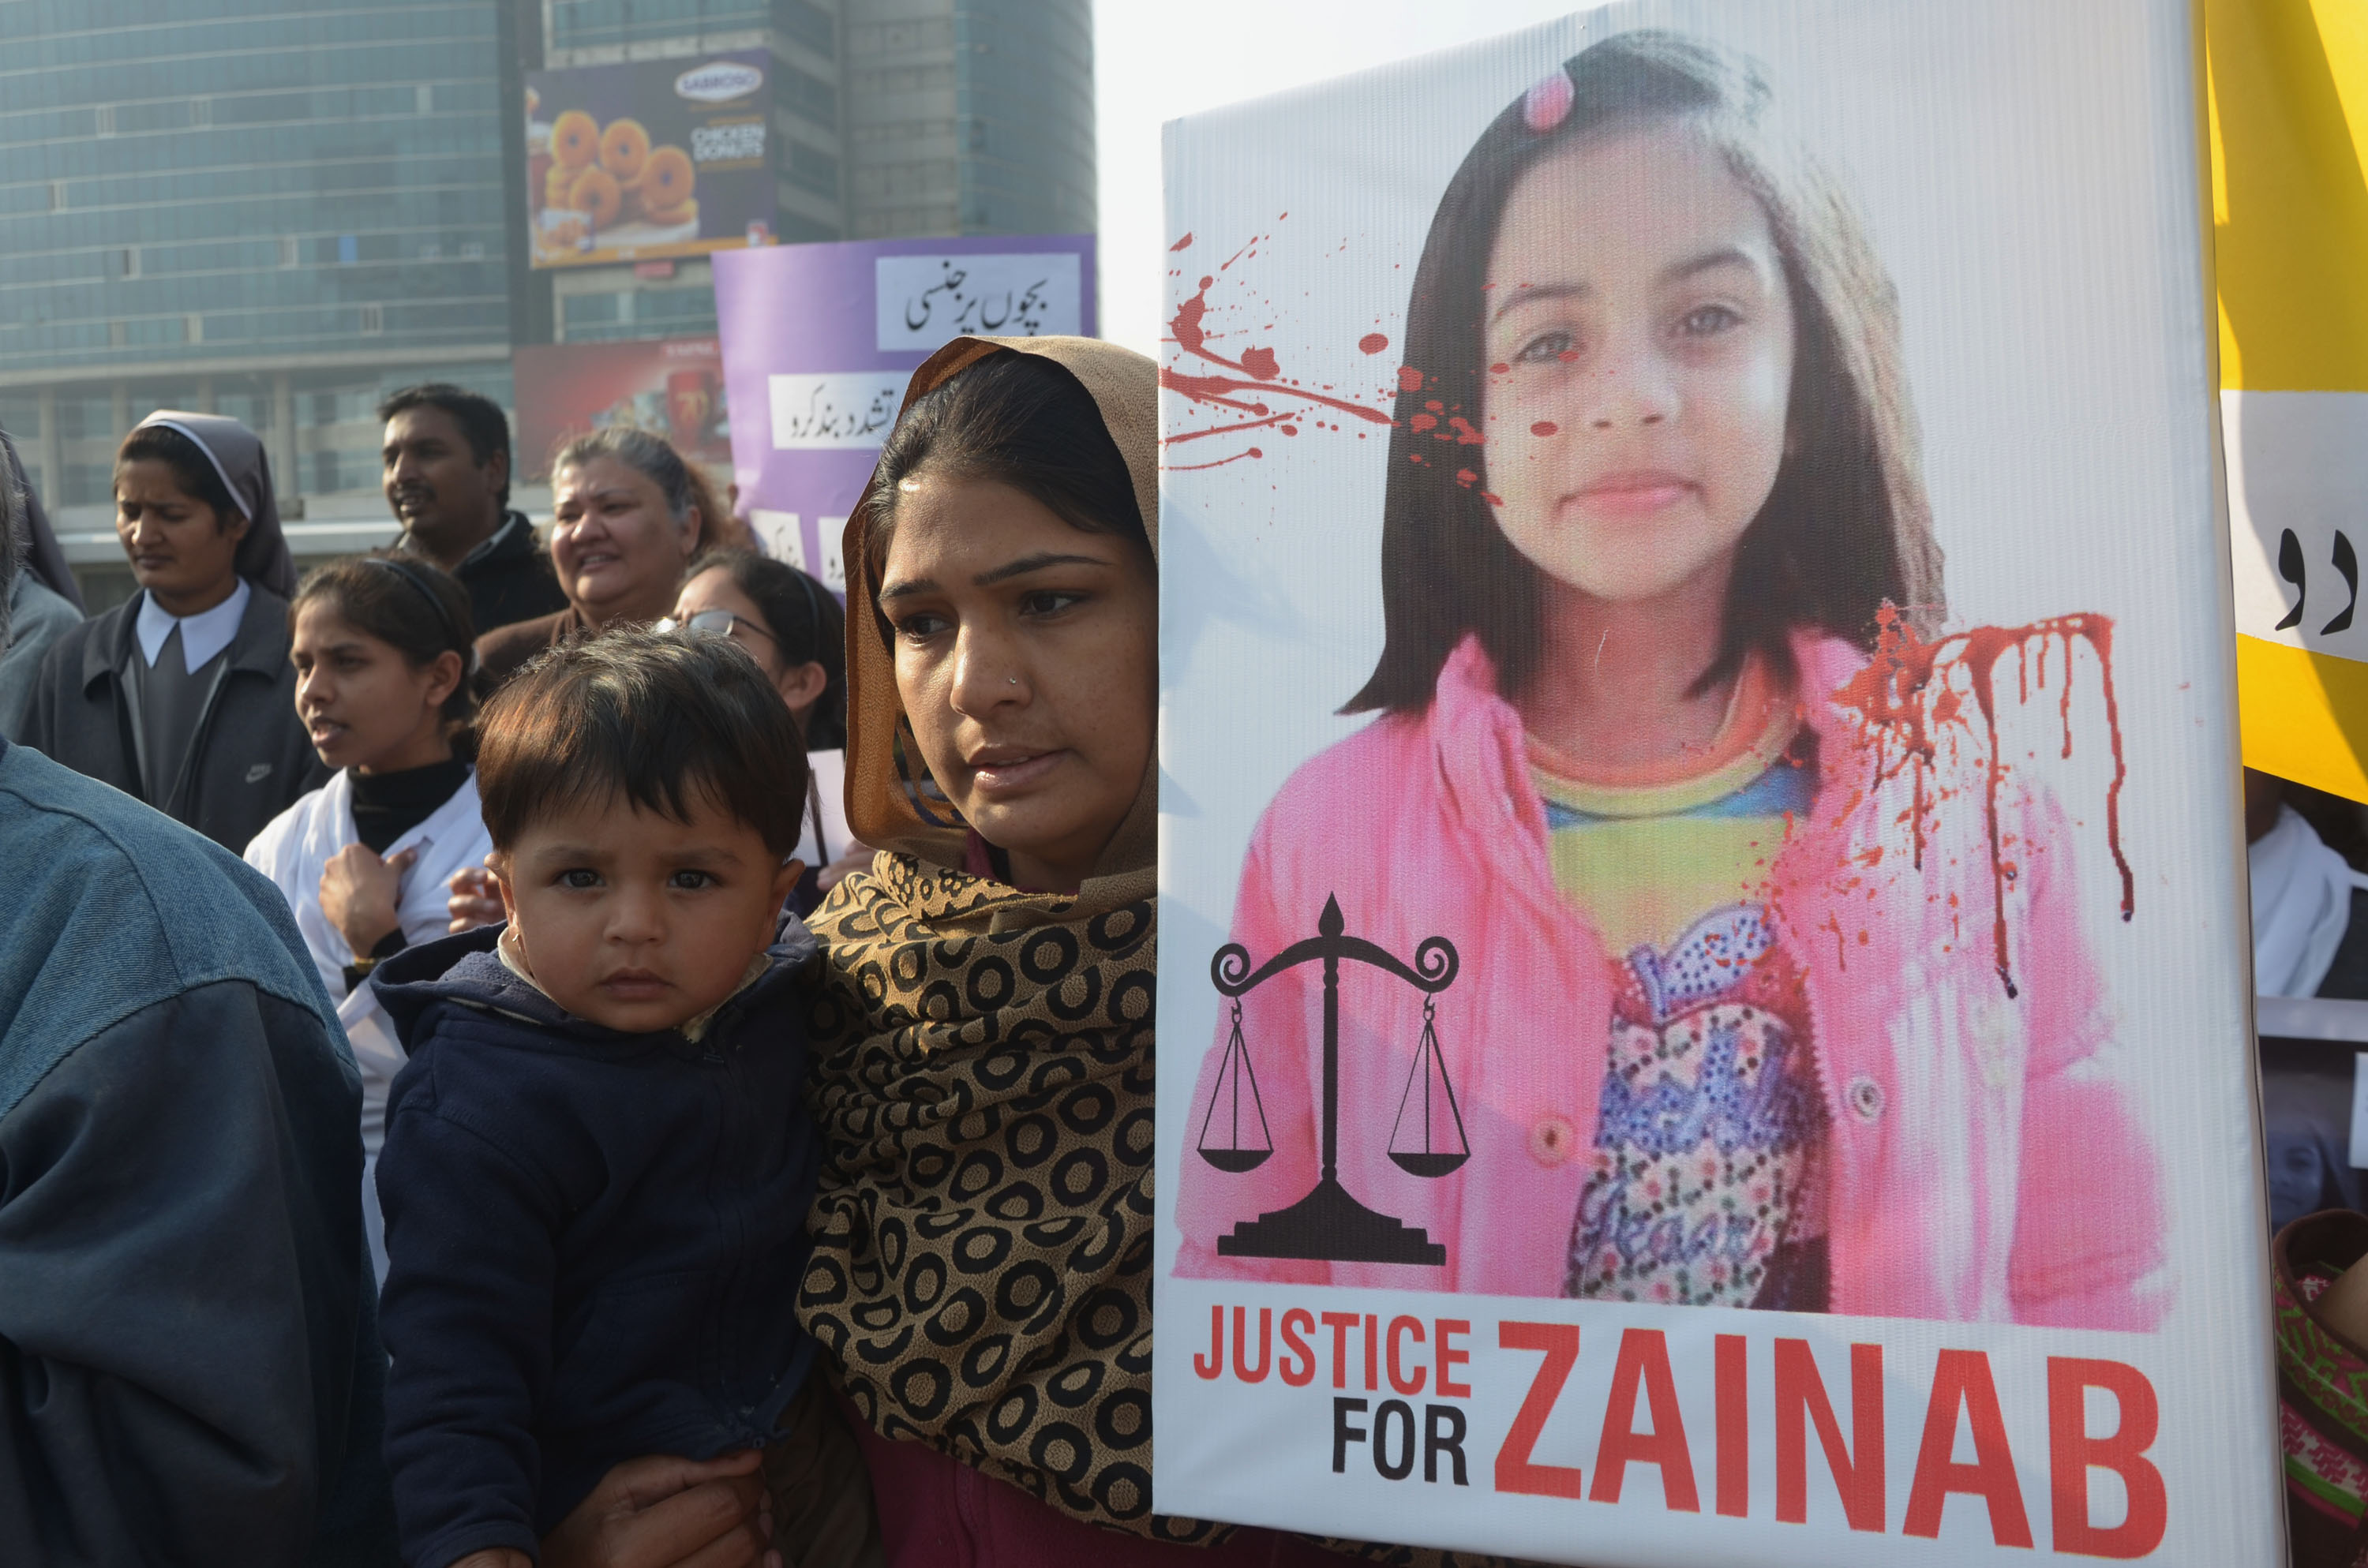 Pakistani Activists of Cecil Chaudhry and Iris Foundation (CCIF) holding placards chant slogans to protest the rape and murder of seven year old Zainab Ansari in Kasur District at Liberty Chowk in Lahore on January 14, 2018. Hundreds of protesters enraged over the murder of a young girl threw stones at government buildings in a Pakistani city near the Indian border for a second day January 11, amid growing outrage over the killing. (Photo by Rana Sajid Hussain—Pacific Press/LightRocket/Getty Images)